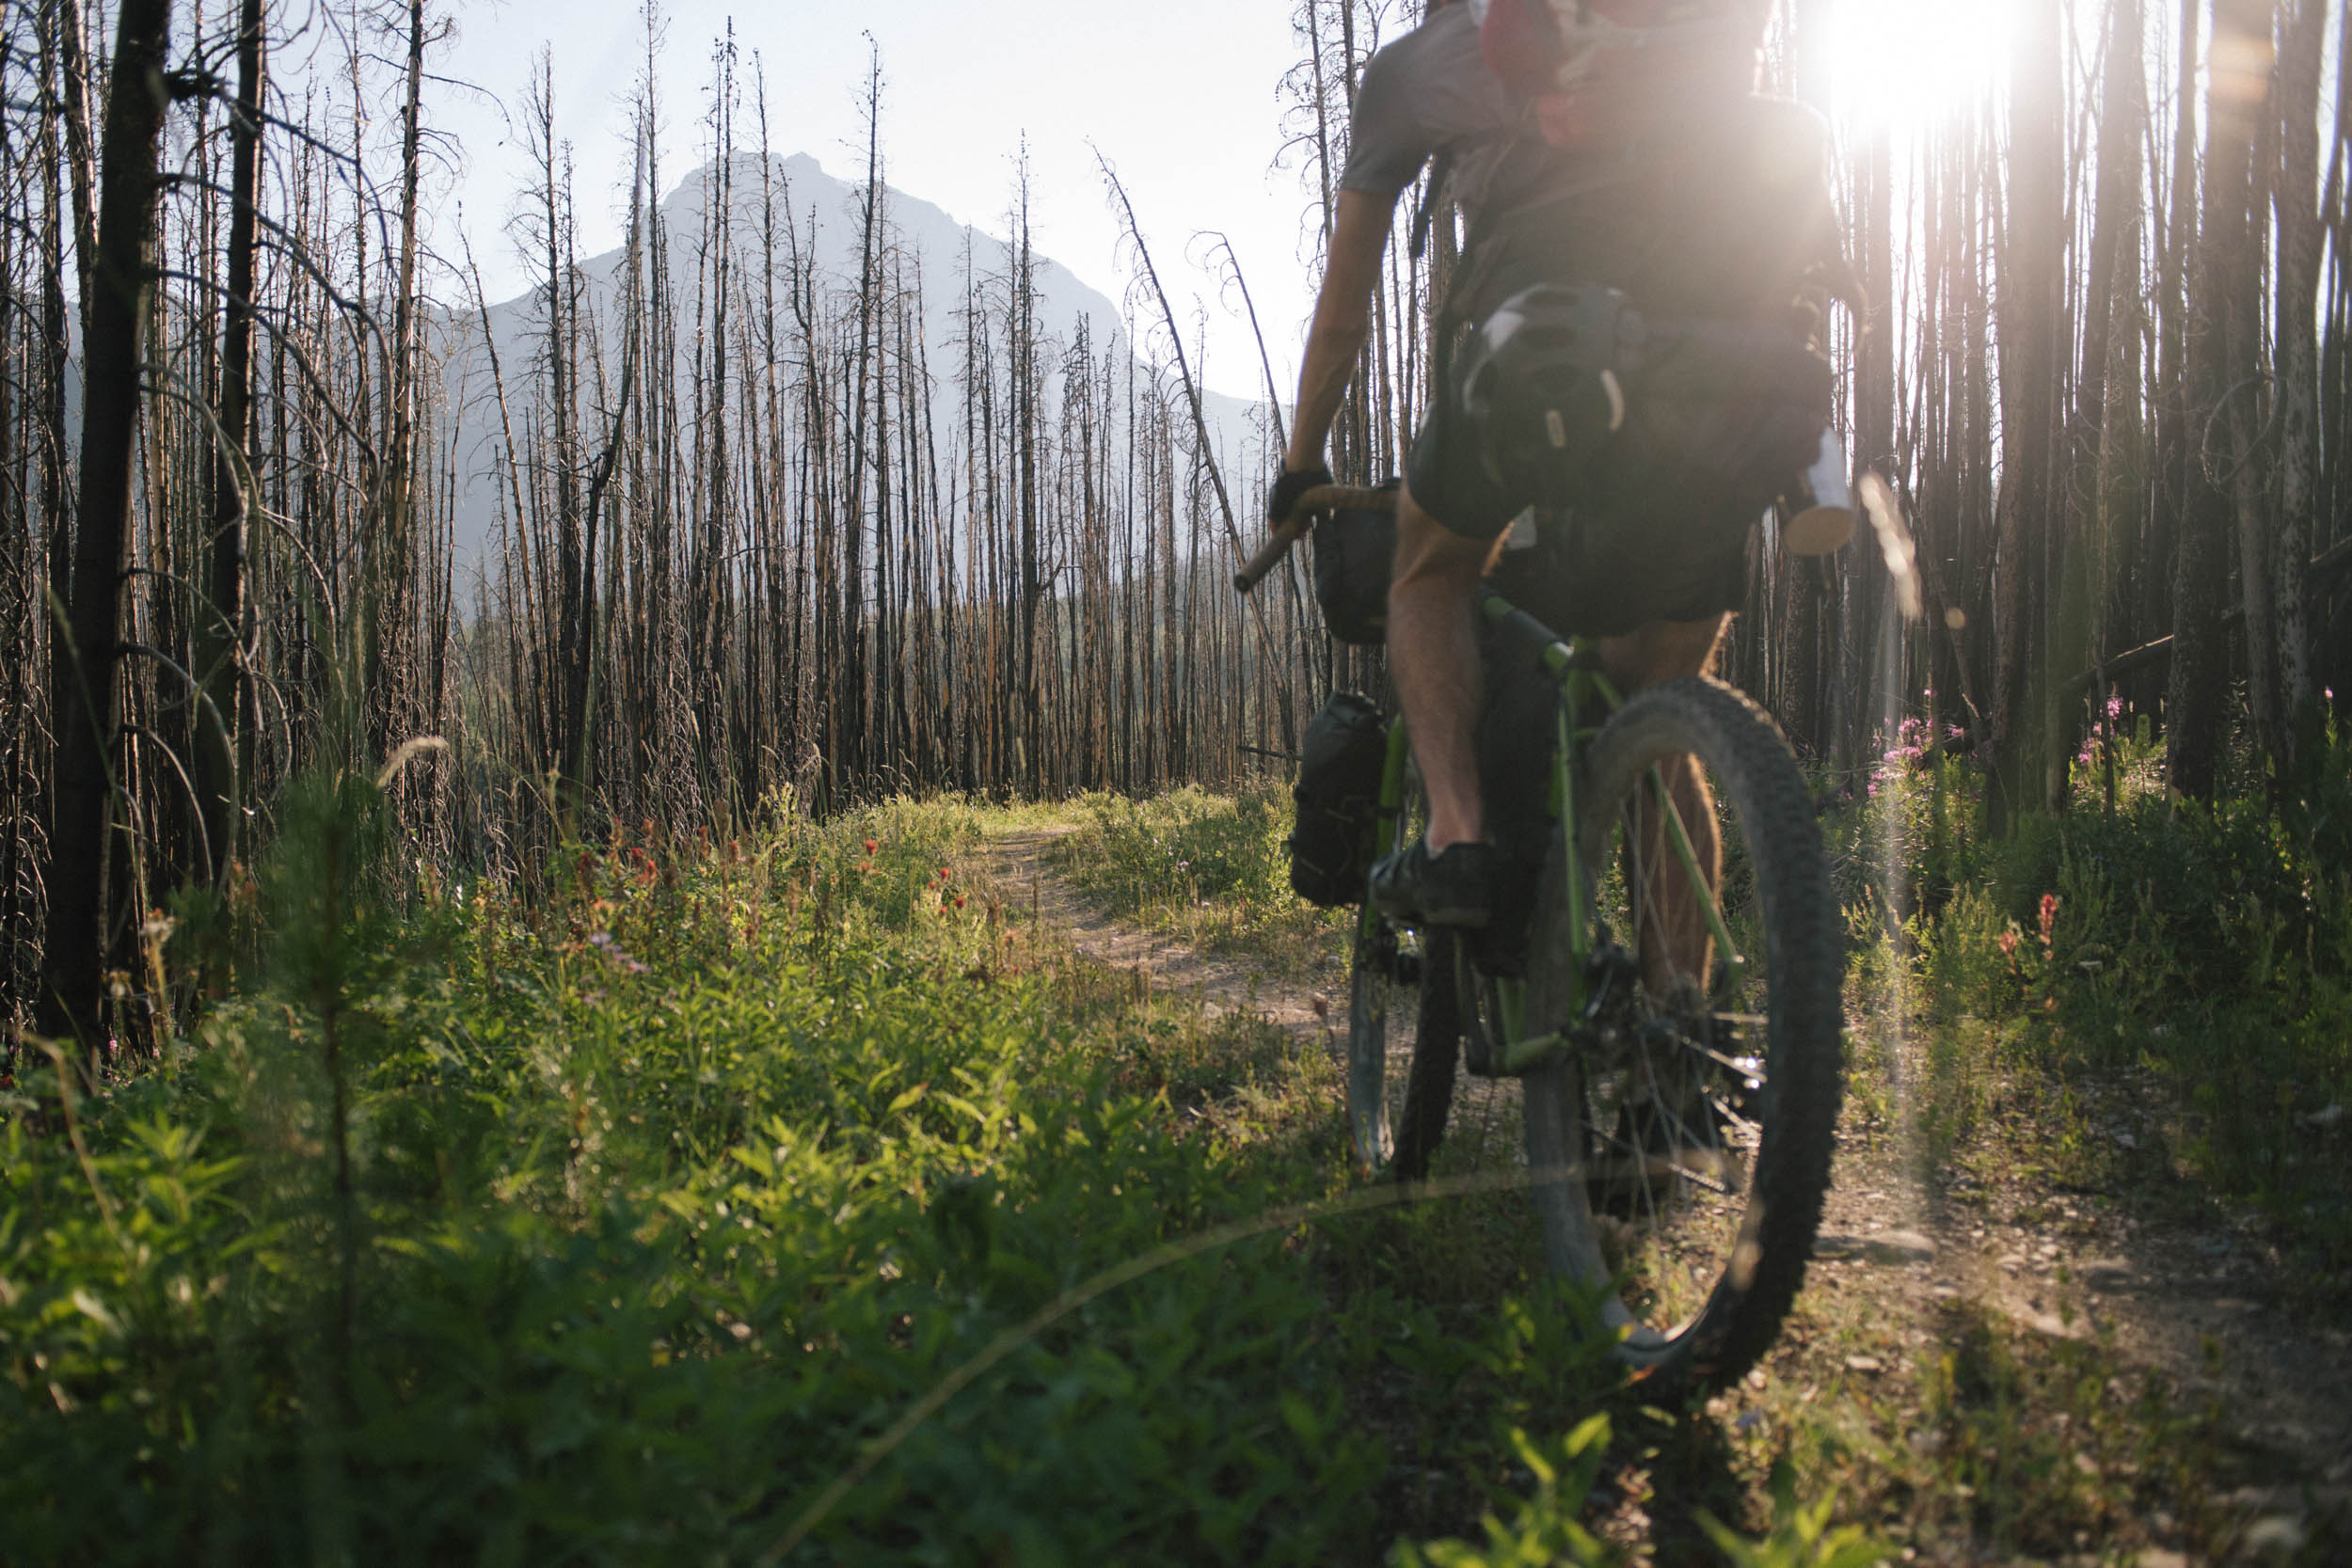 Pat Valade, Great Divide Mountain Bike Route